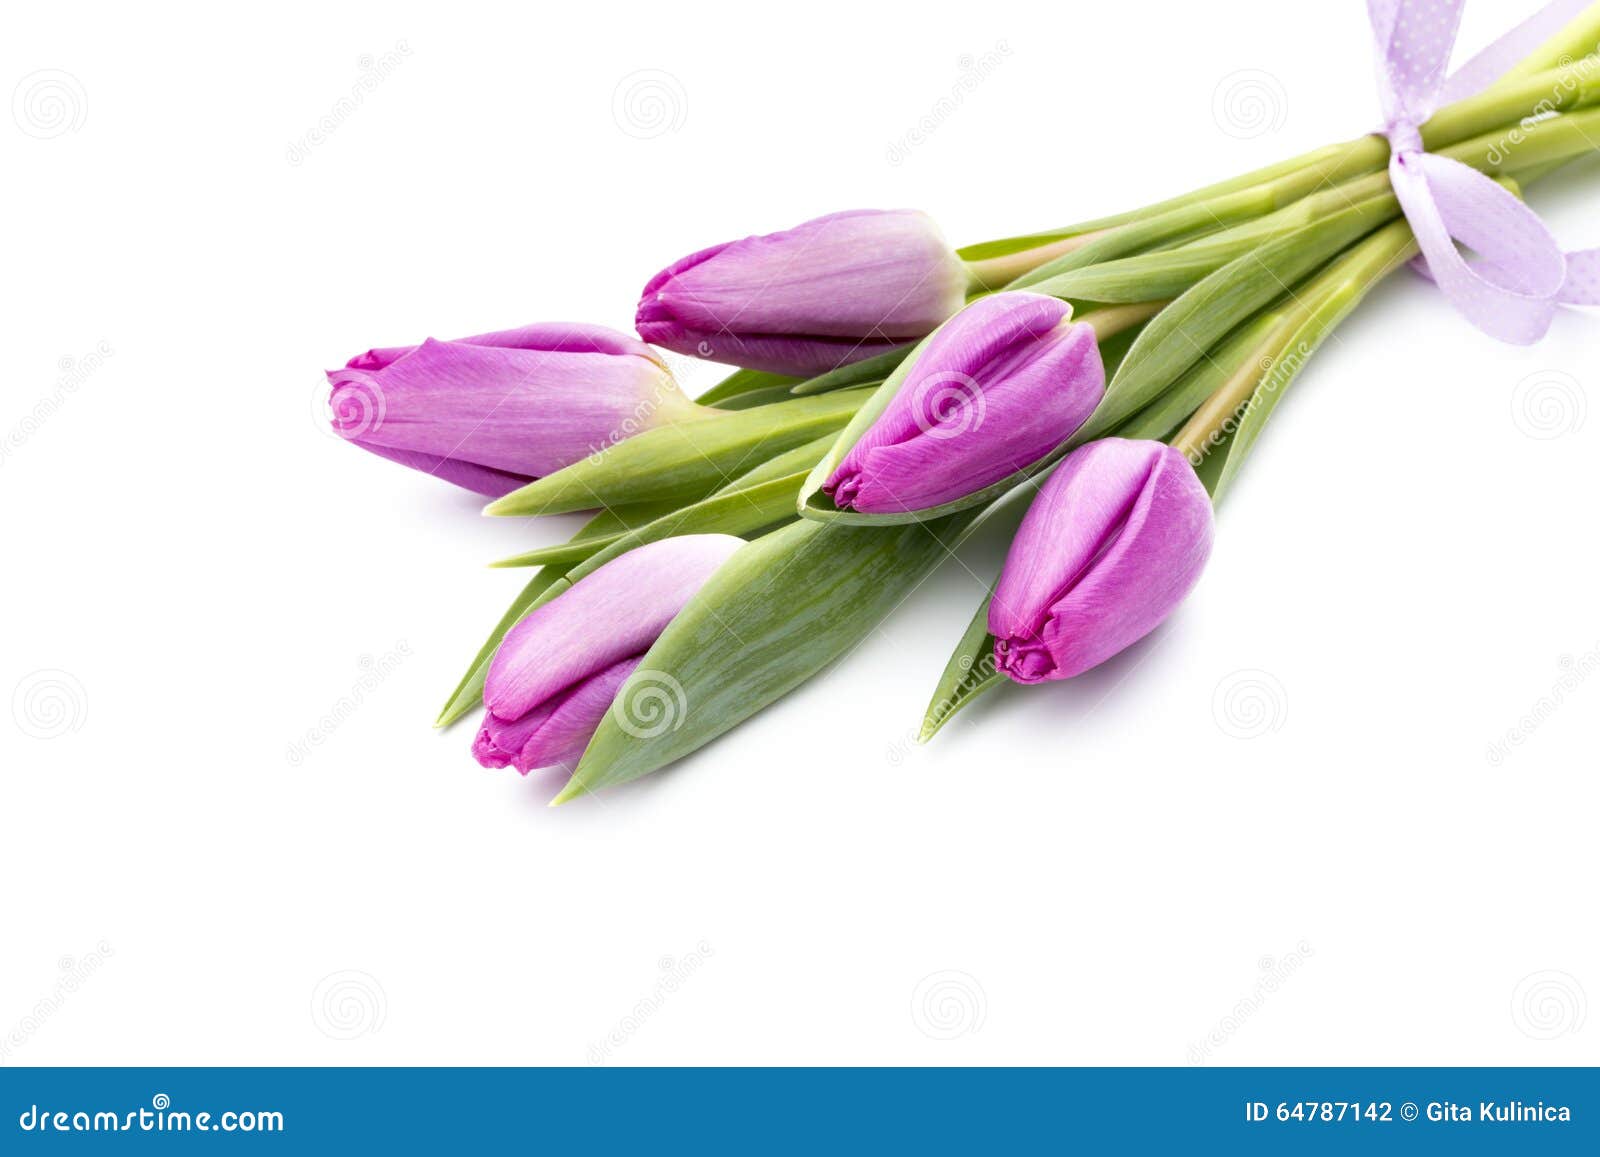 Tulips on the White Background. Stock Photo - Image of flowers, bright ...